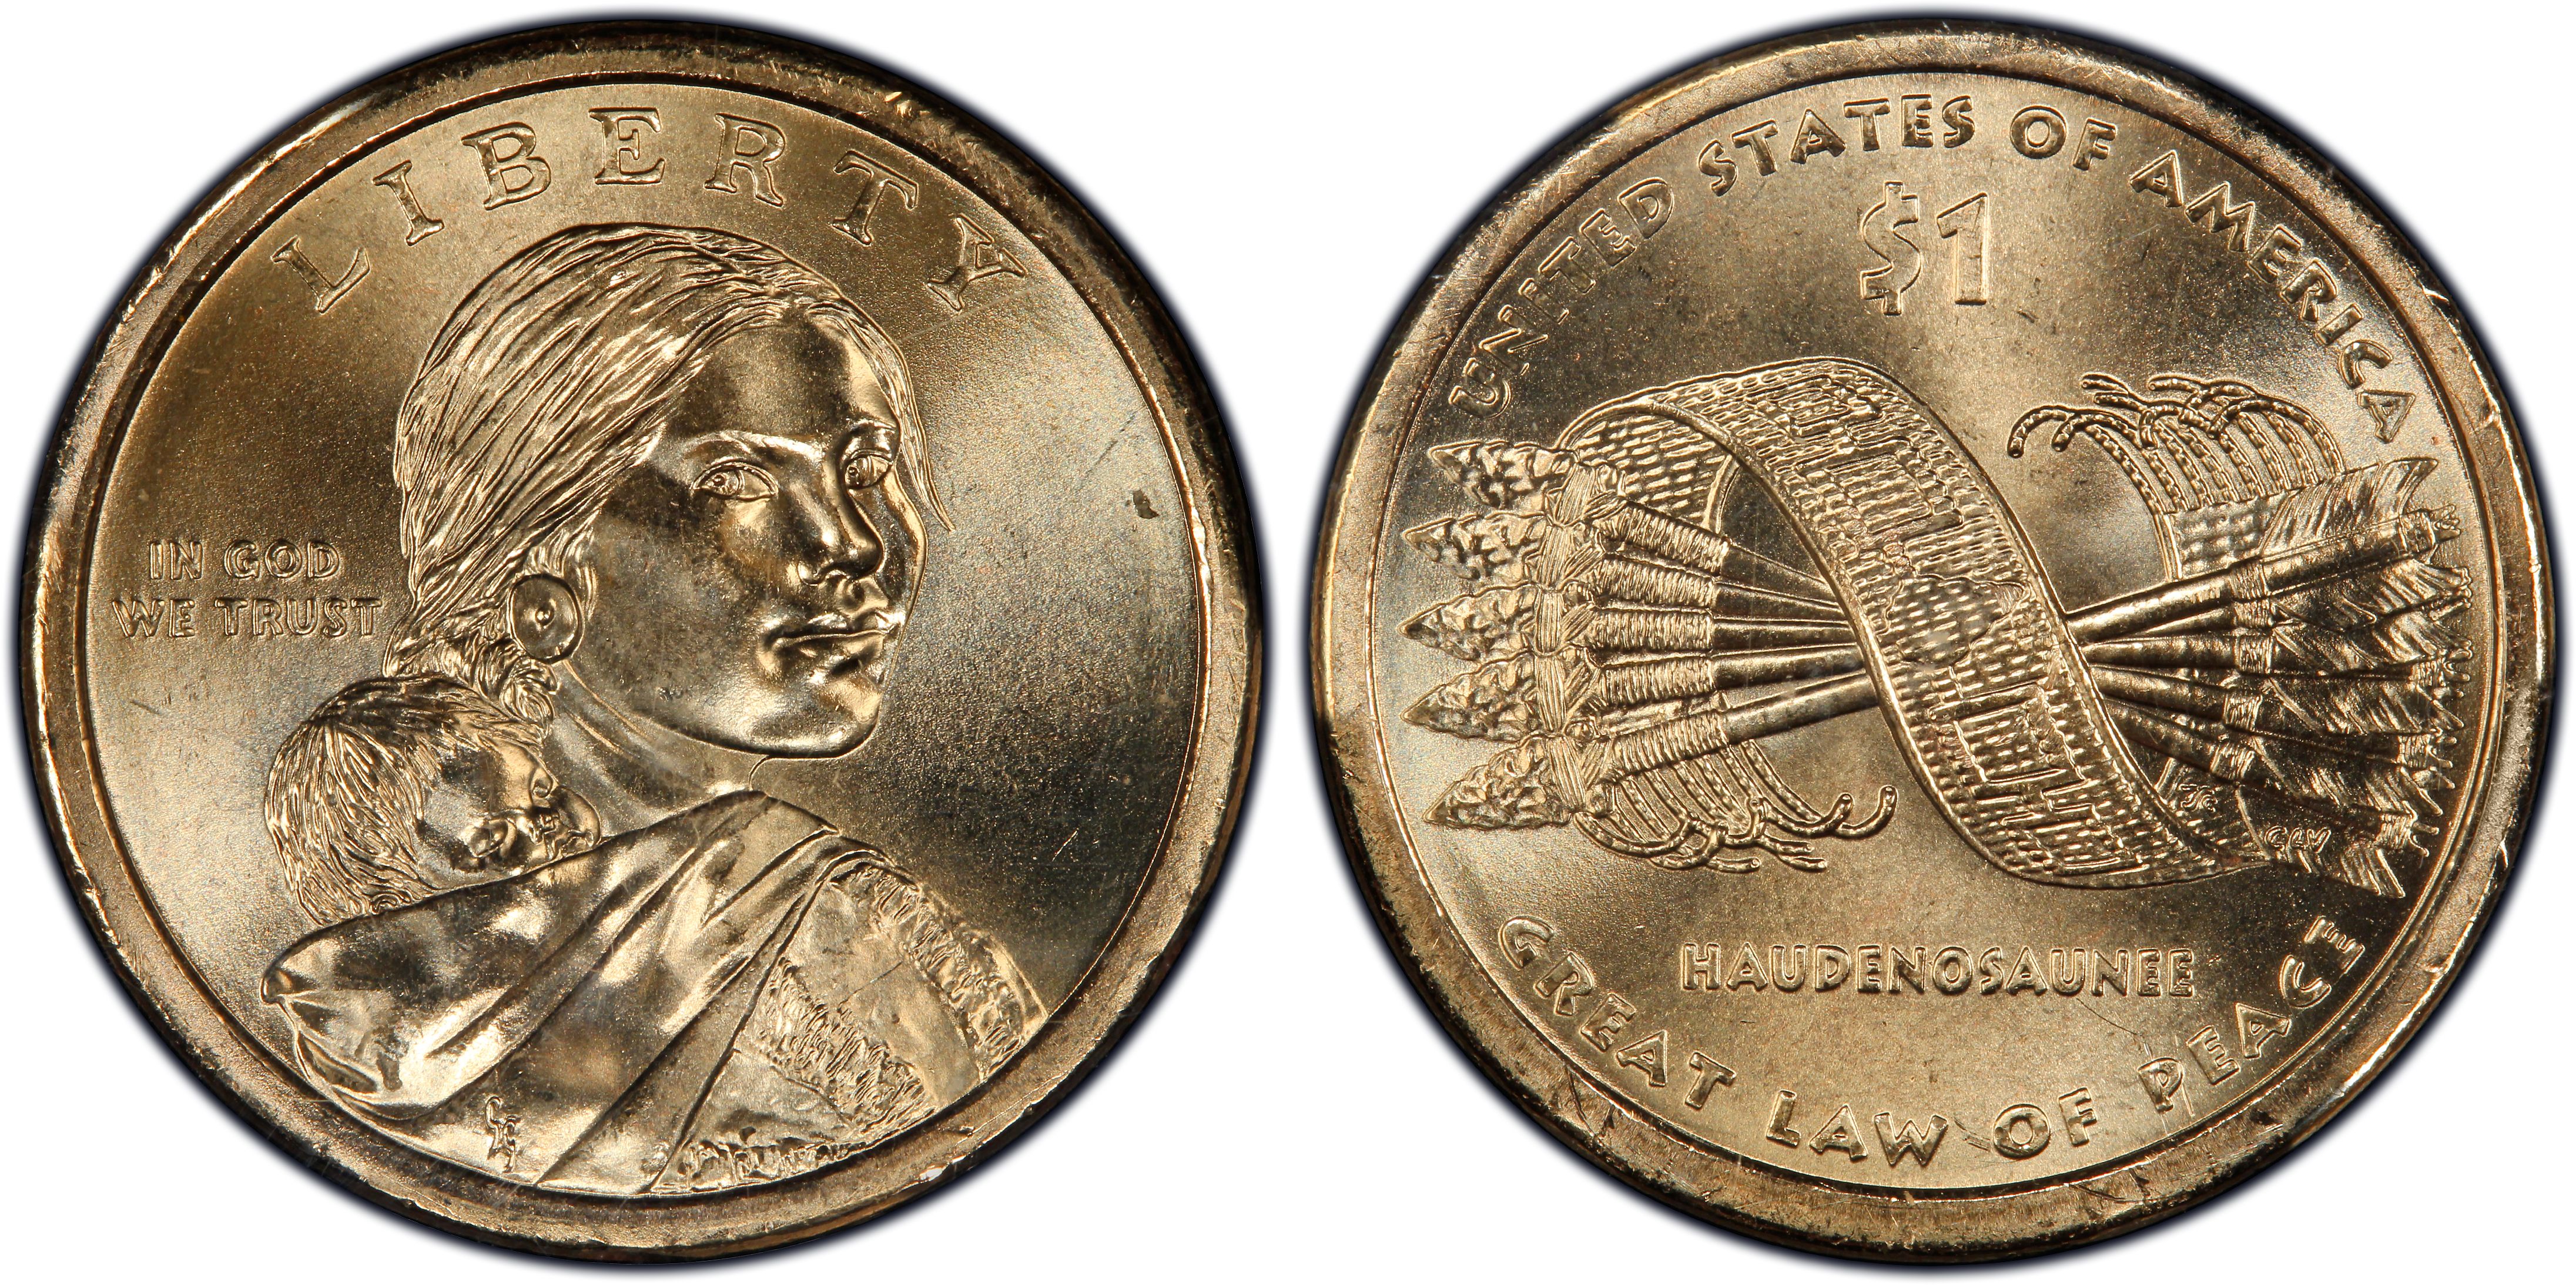 Details about  / 2010 S Proof Native American Dollar